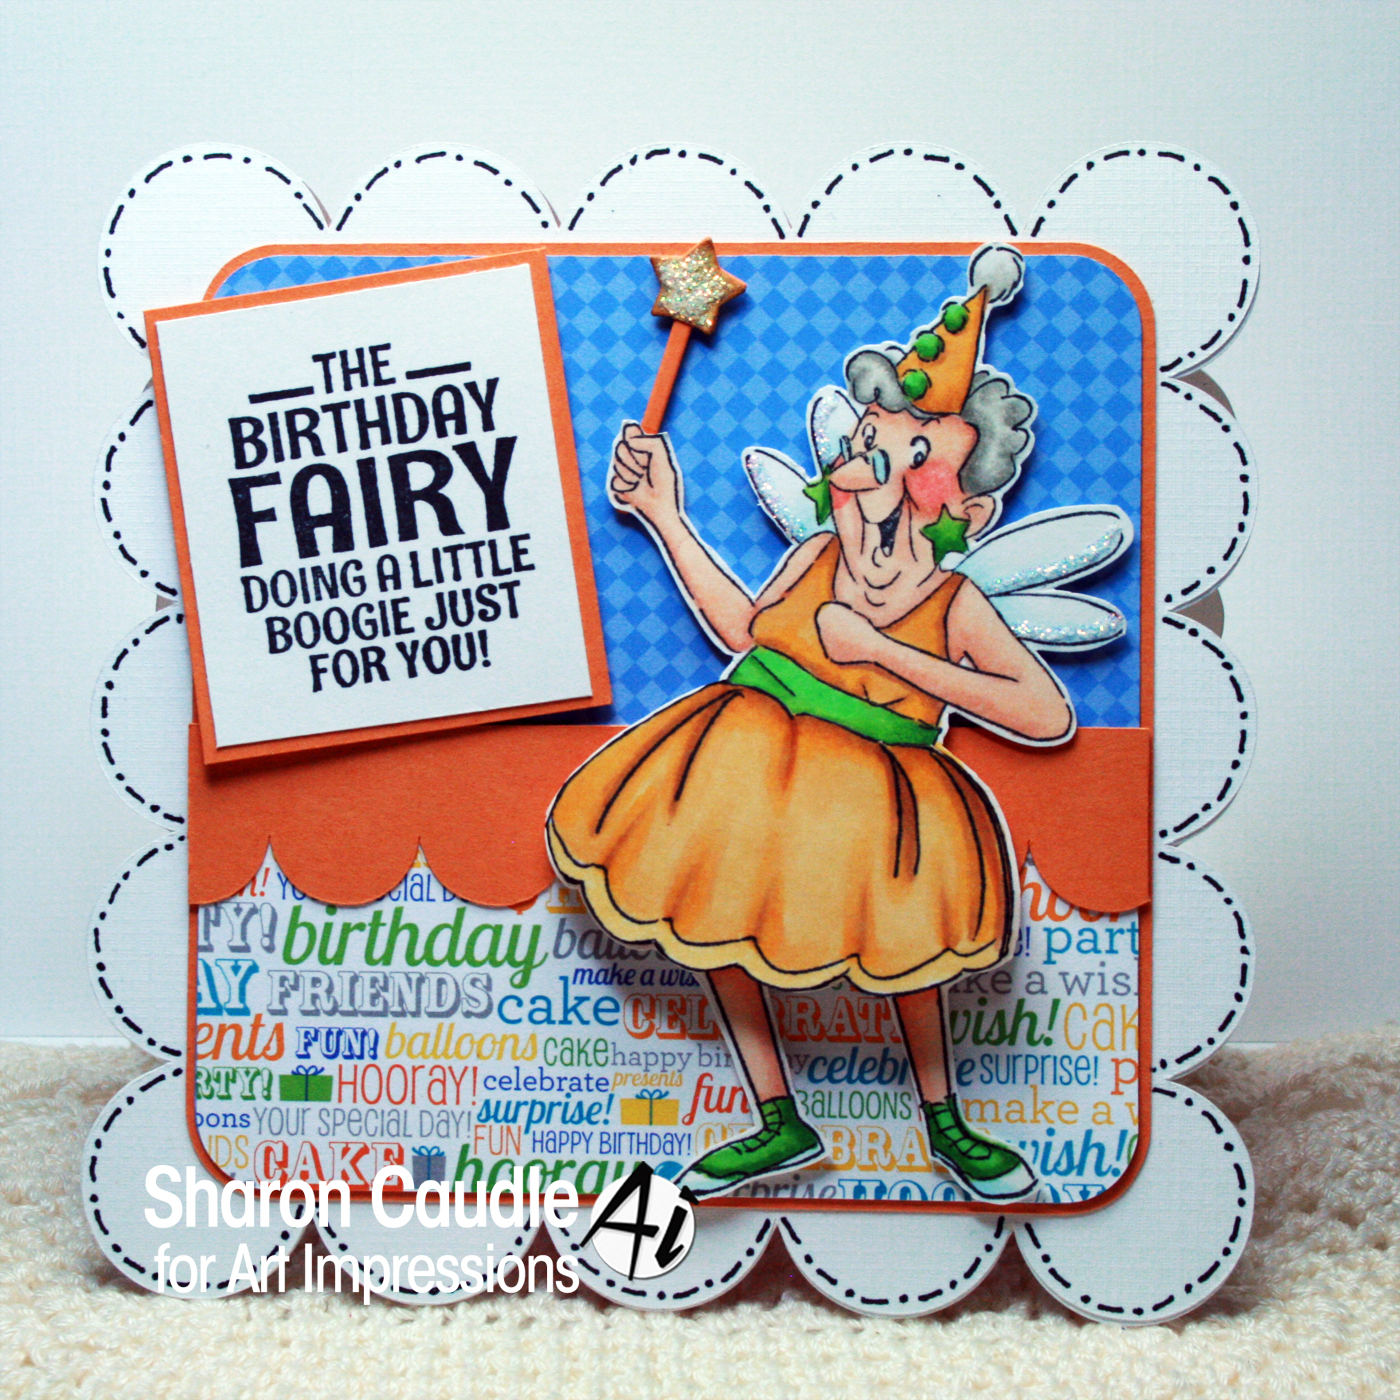 Birthday Fairy by Sharon Caudle